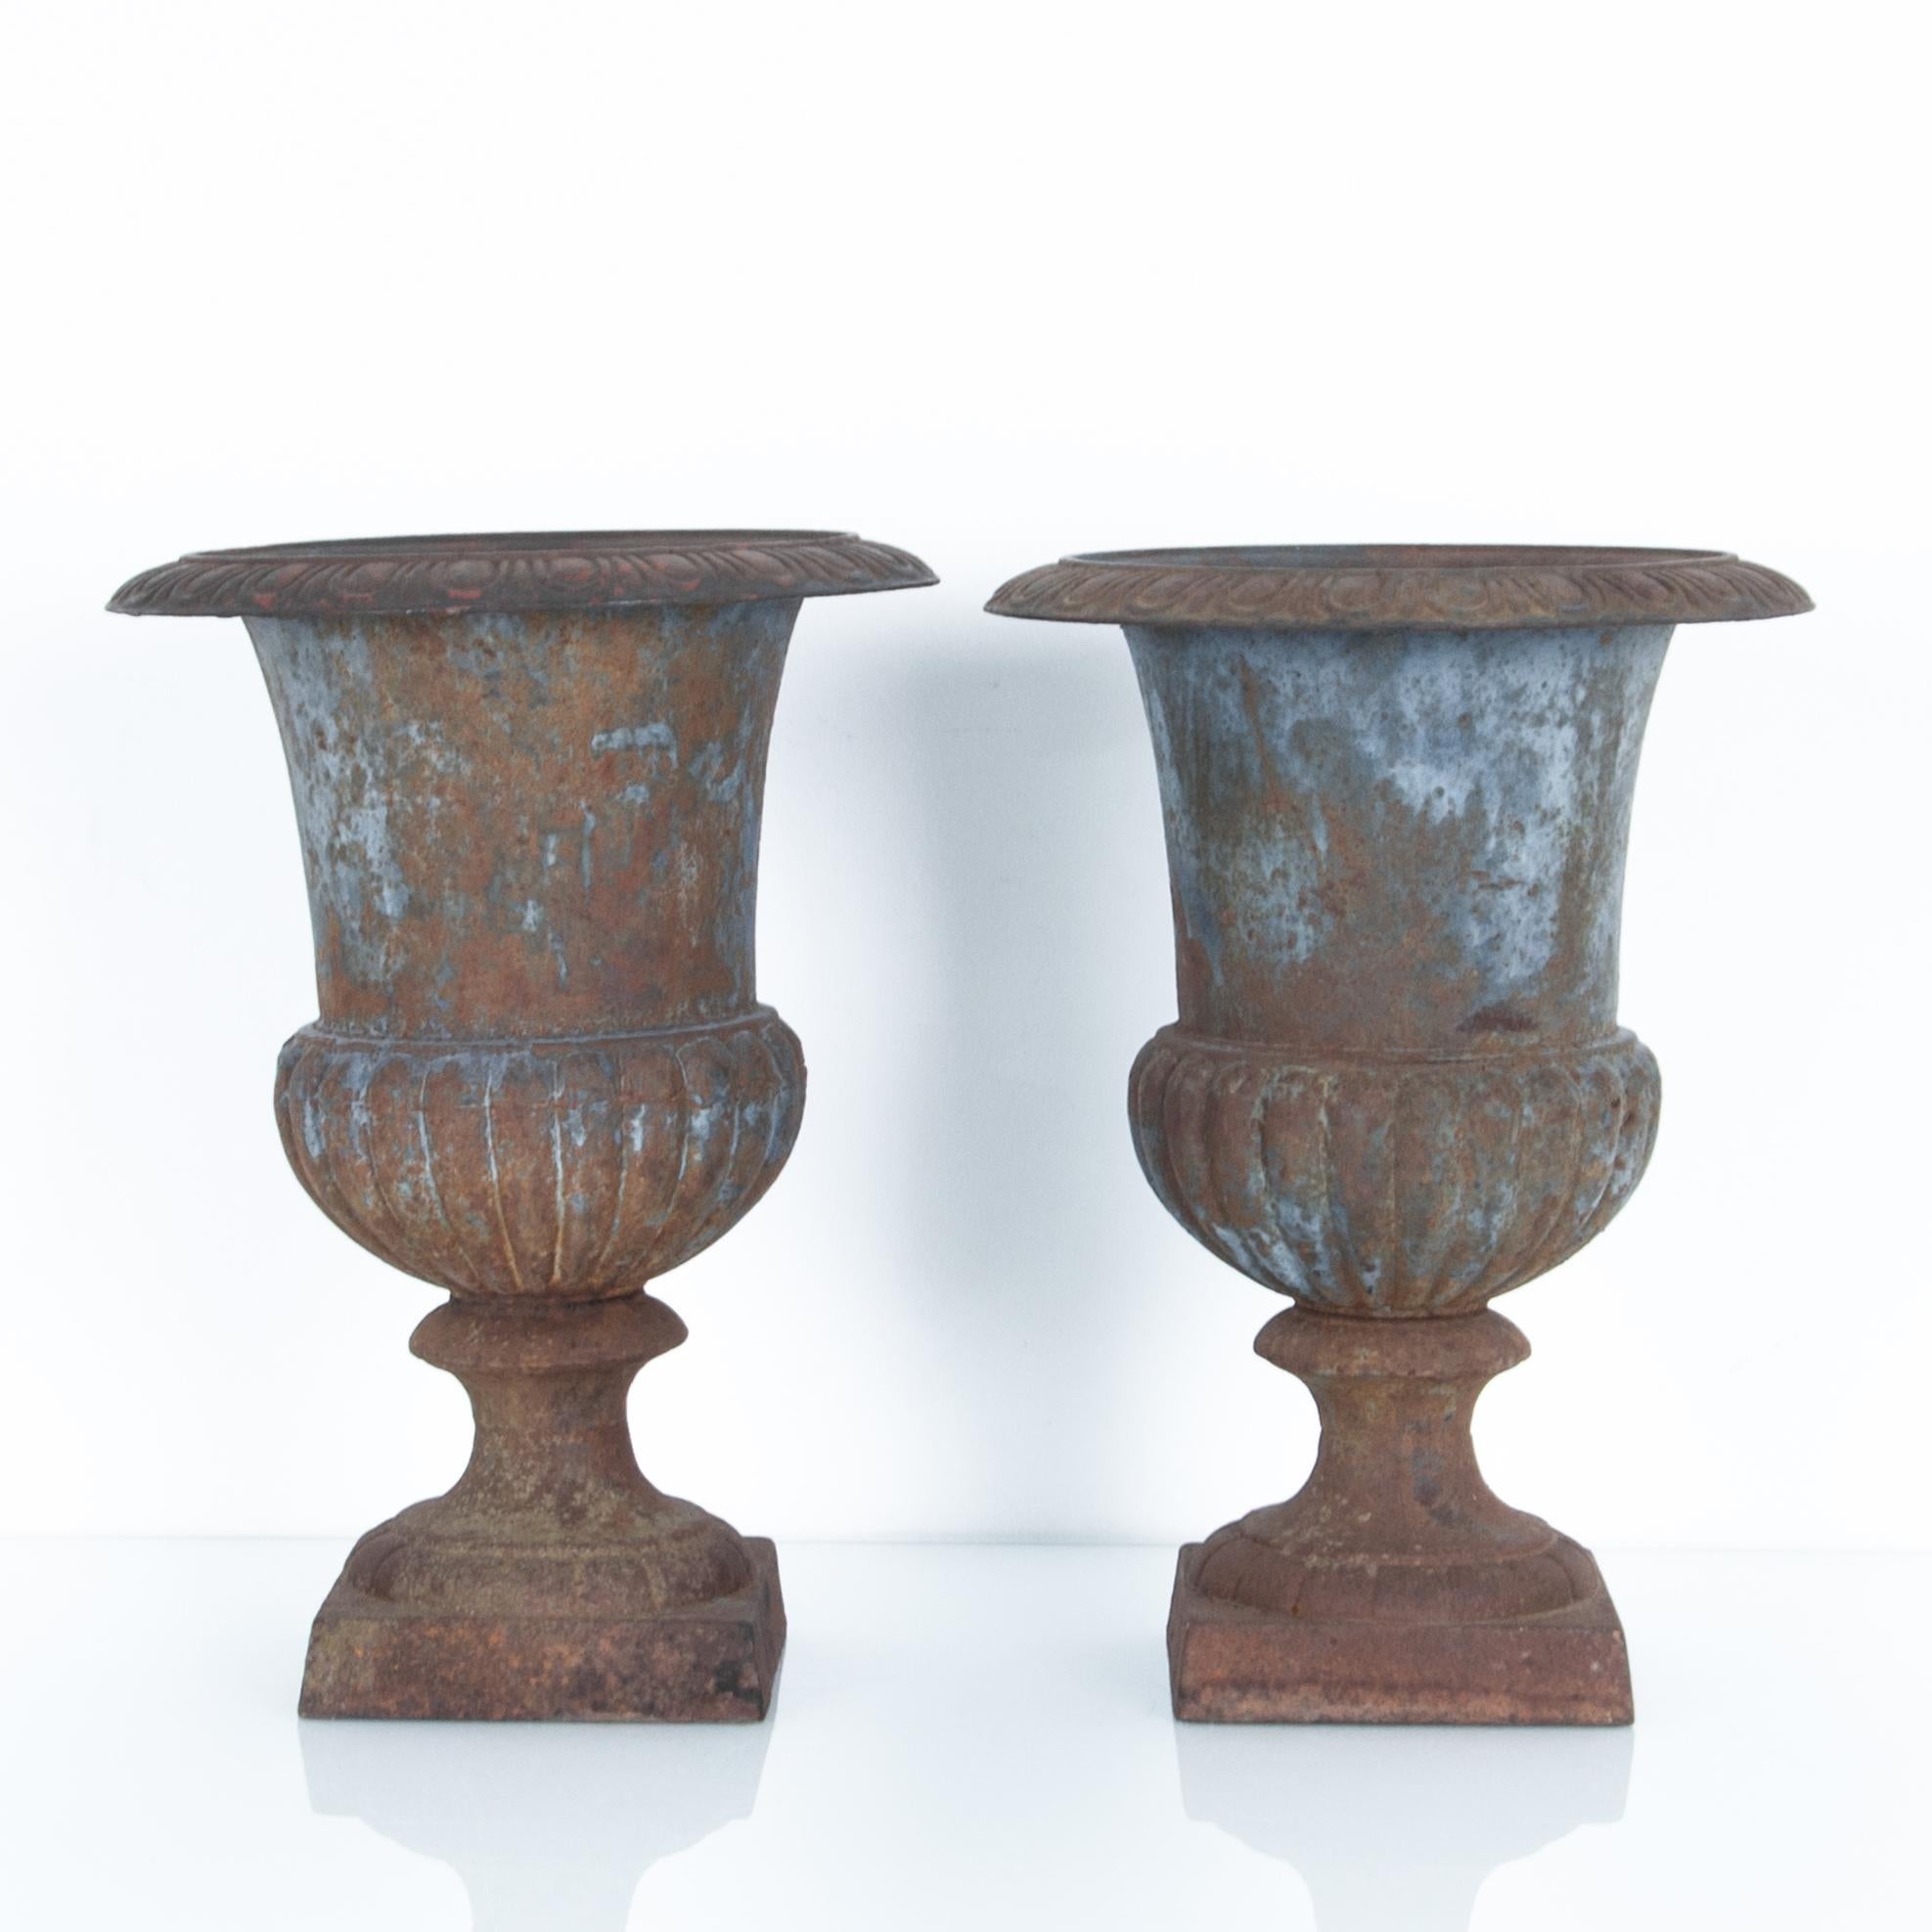 French Provincial 1920s French Cast Iron Urns, a Pair